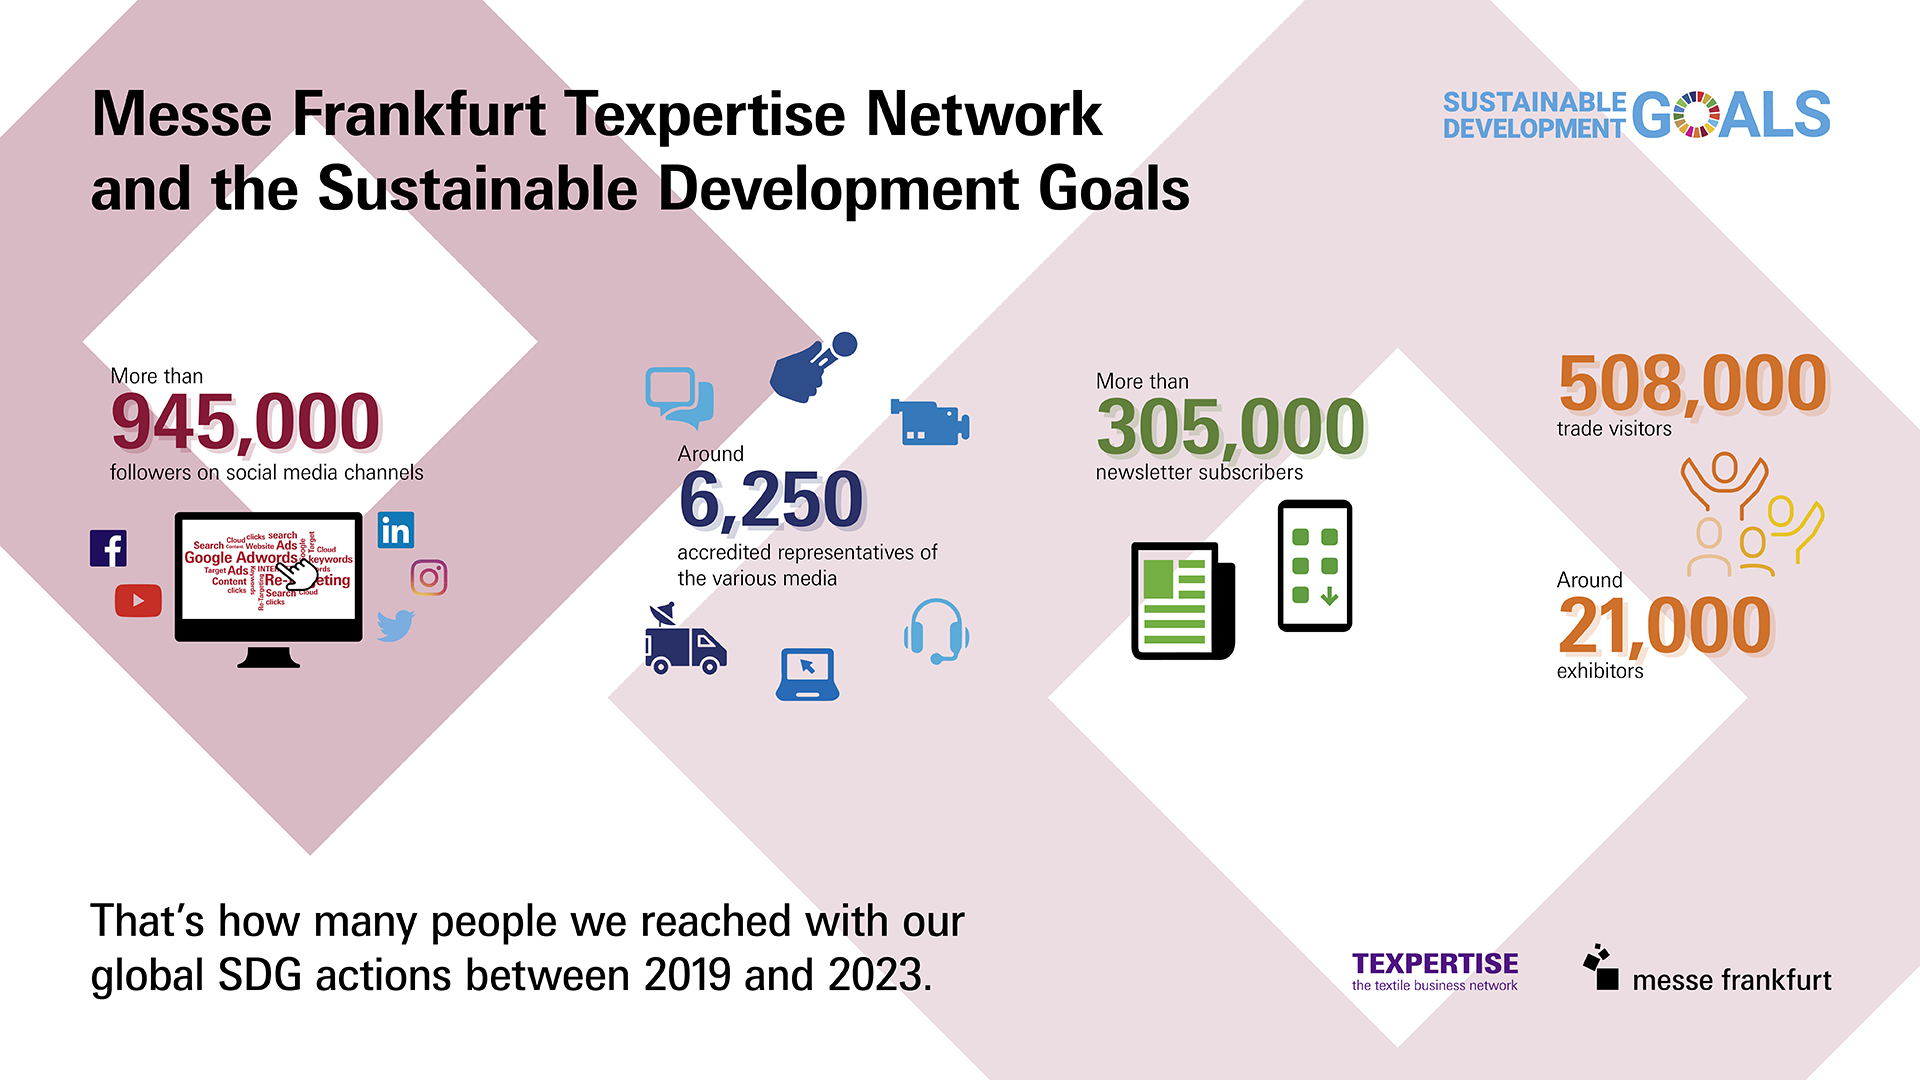 Graphic: Messe Frankfurt Texpertise Network and the Sustainable Development Goals